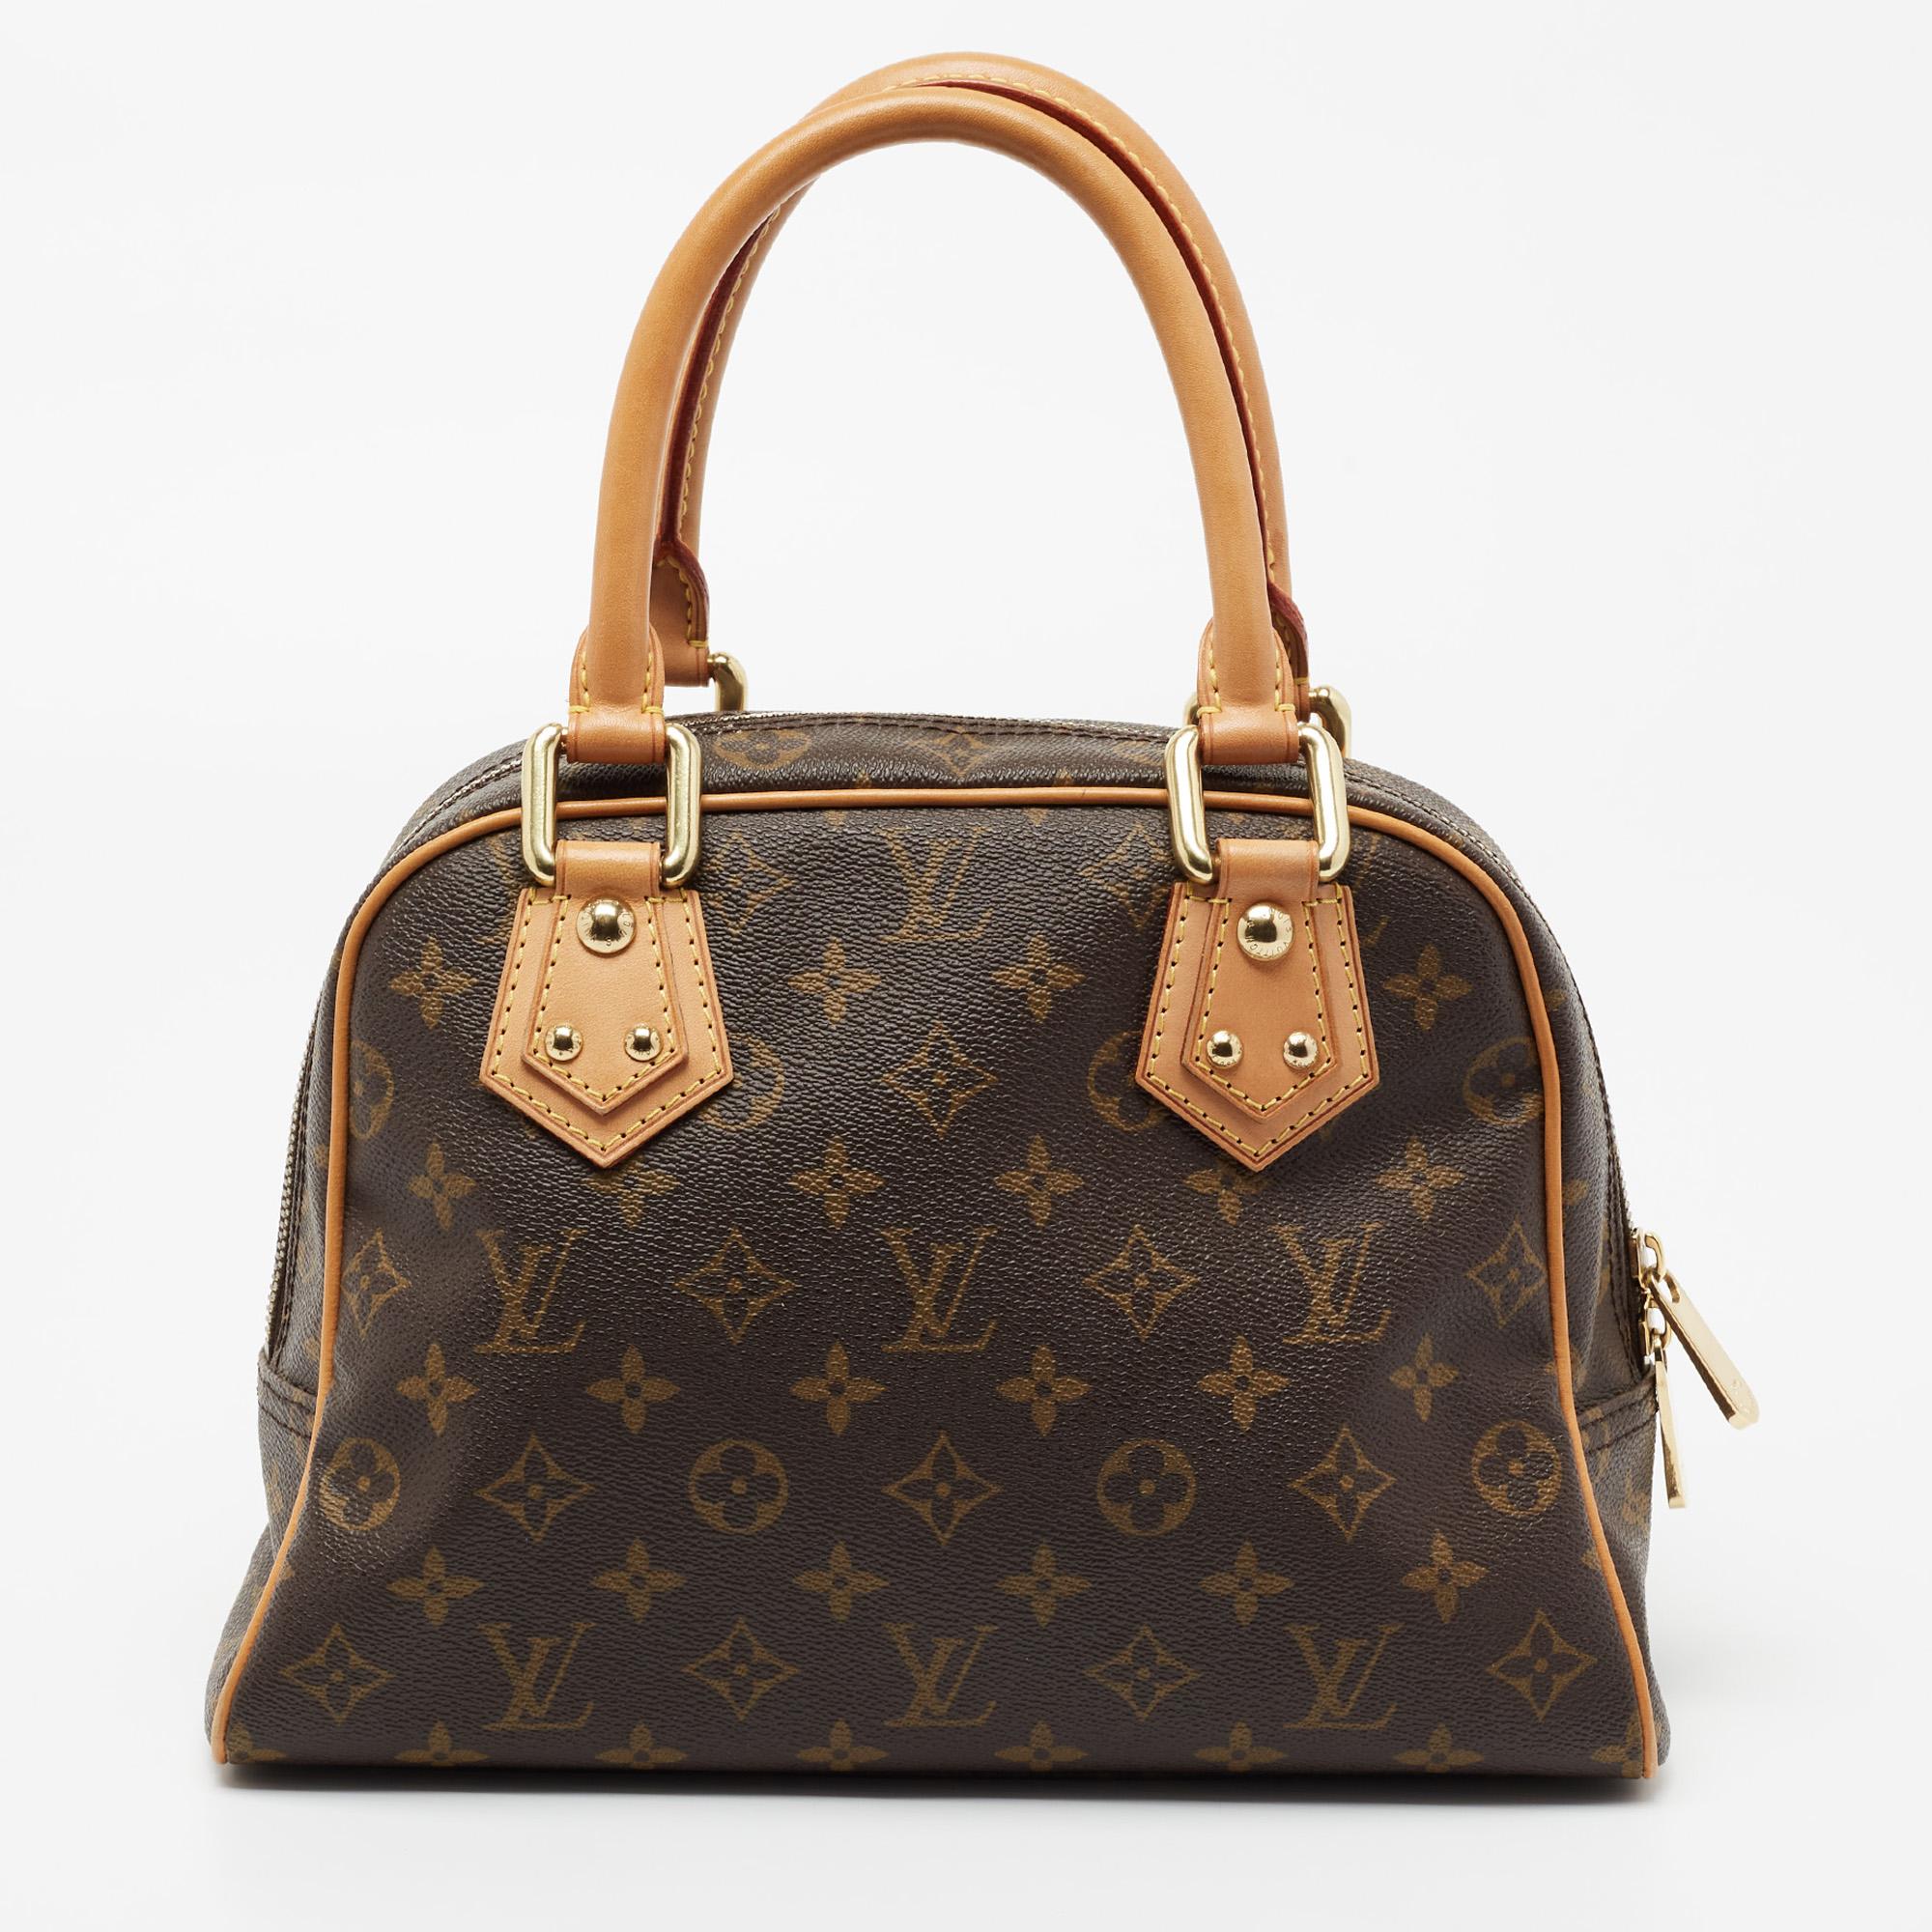 Own this gorgeous Manhattan PM Bag by Louis Vuitton today and flaunt it wherever you go. The bag has been crafted from signature Monogram canvas and lined with Alcantara. It is equipped with two push-lock pockets on the front, a main zip-enclosed